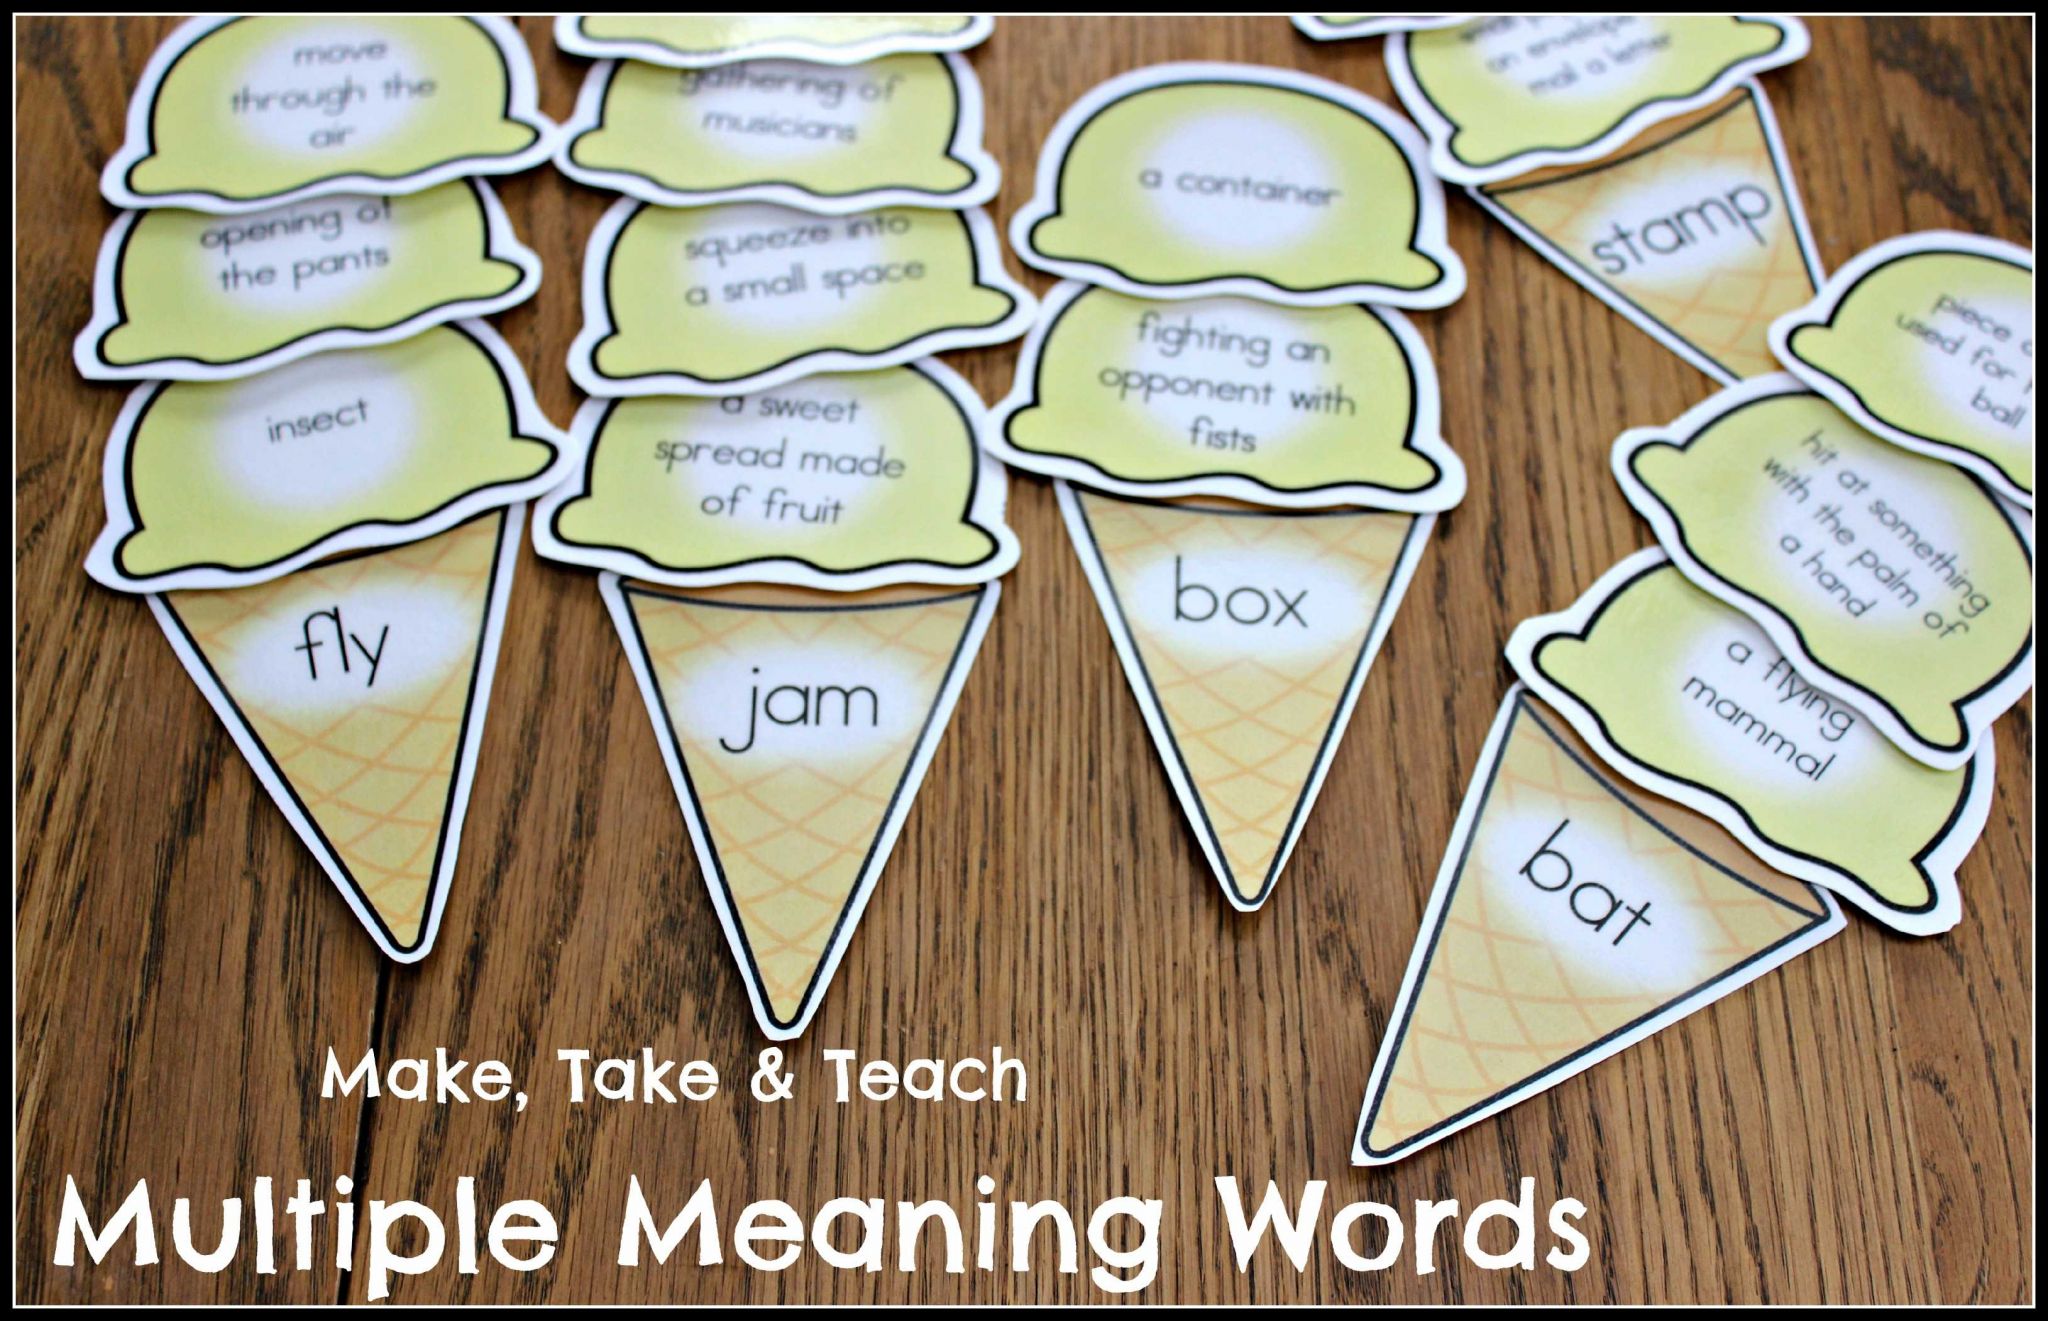 Multiple Meaning Words Worksheets 5th Grade as Well as Words with Multiple Meanings Worksheet 6th Grade Meaning Ice Cream